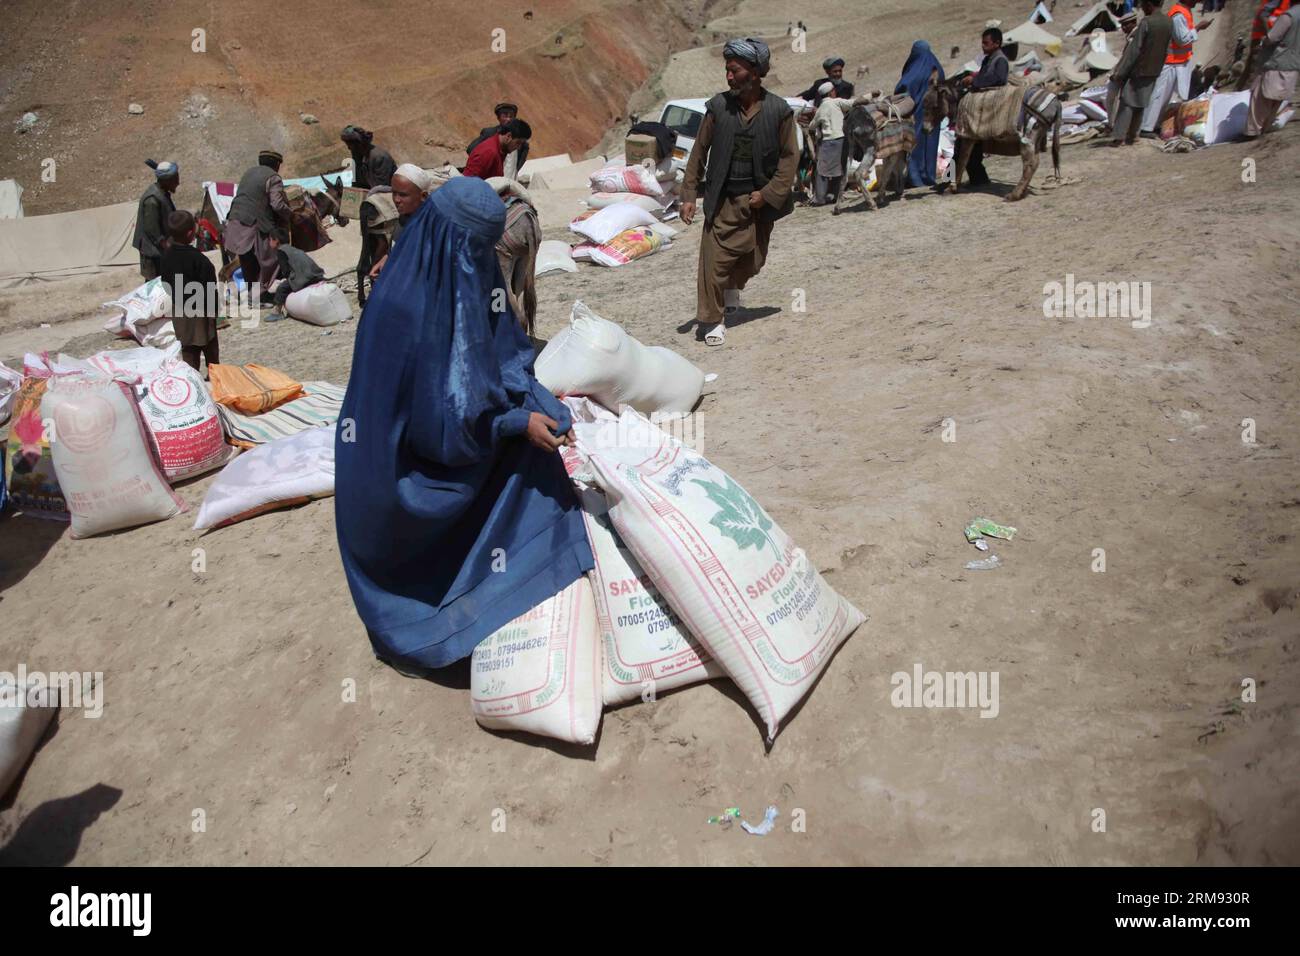 Afghan women receive relief food after the landslide in Badakhshan province in northern Afghanistan on May 5, 2014. More than 2,500 people are feared to have lost their lives in the landslide happening Friday in a remote village in northern Afghanistan. Days of heavy rain in the mountainous Badakhshan province caused the landslide. (Xinhua/Ahmad Massoud) (bxq) AFGHANISTAN-BADAKHSHAN-LANDSLIDE-AFTERMATH PUBLICATIONxNOTxINxCHN   Afghan Women receive Relief Food After The landslide in Badakhshan Province in Northern Afghanistan ON May 5 2014 More than 2 500 Celebrities are feared to have Lost the Stock Photo